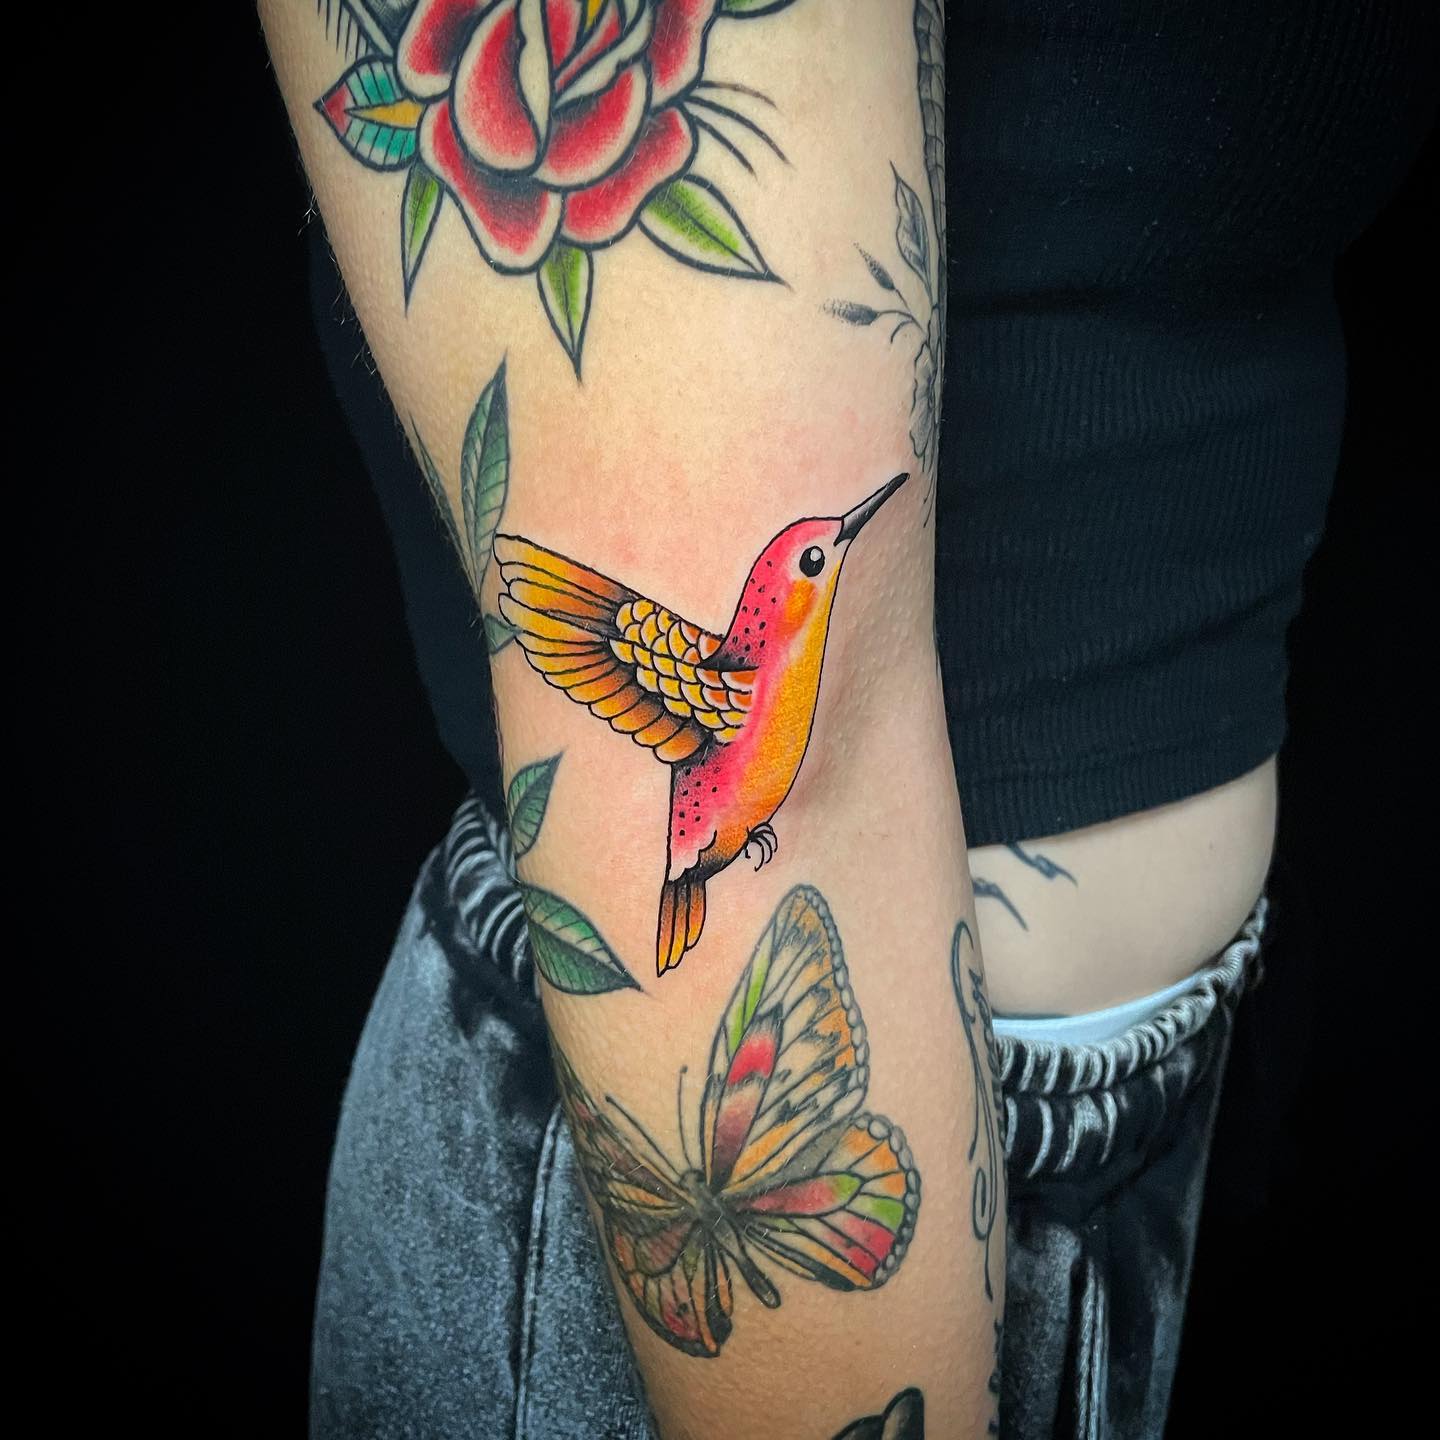 Colorful Aztec Hummingbird with Flowers on Arm